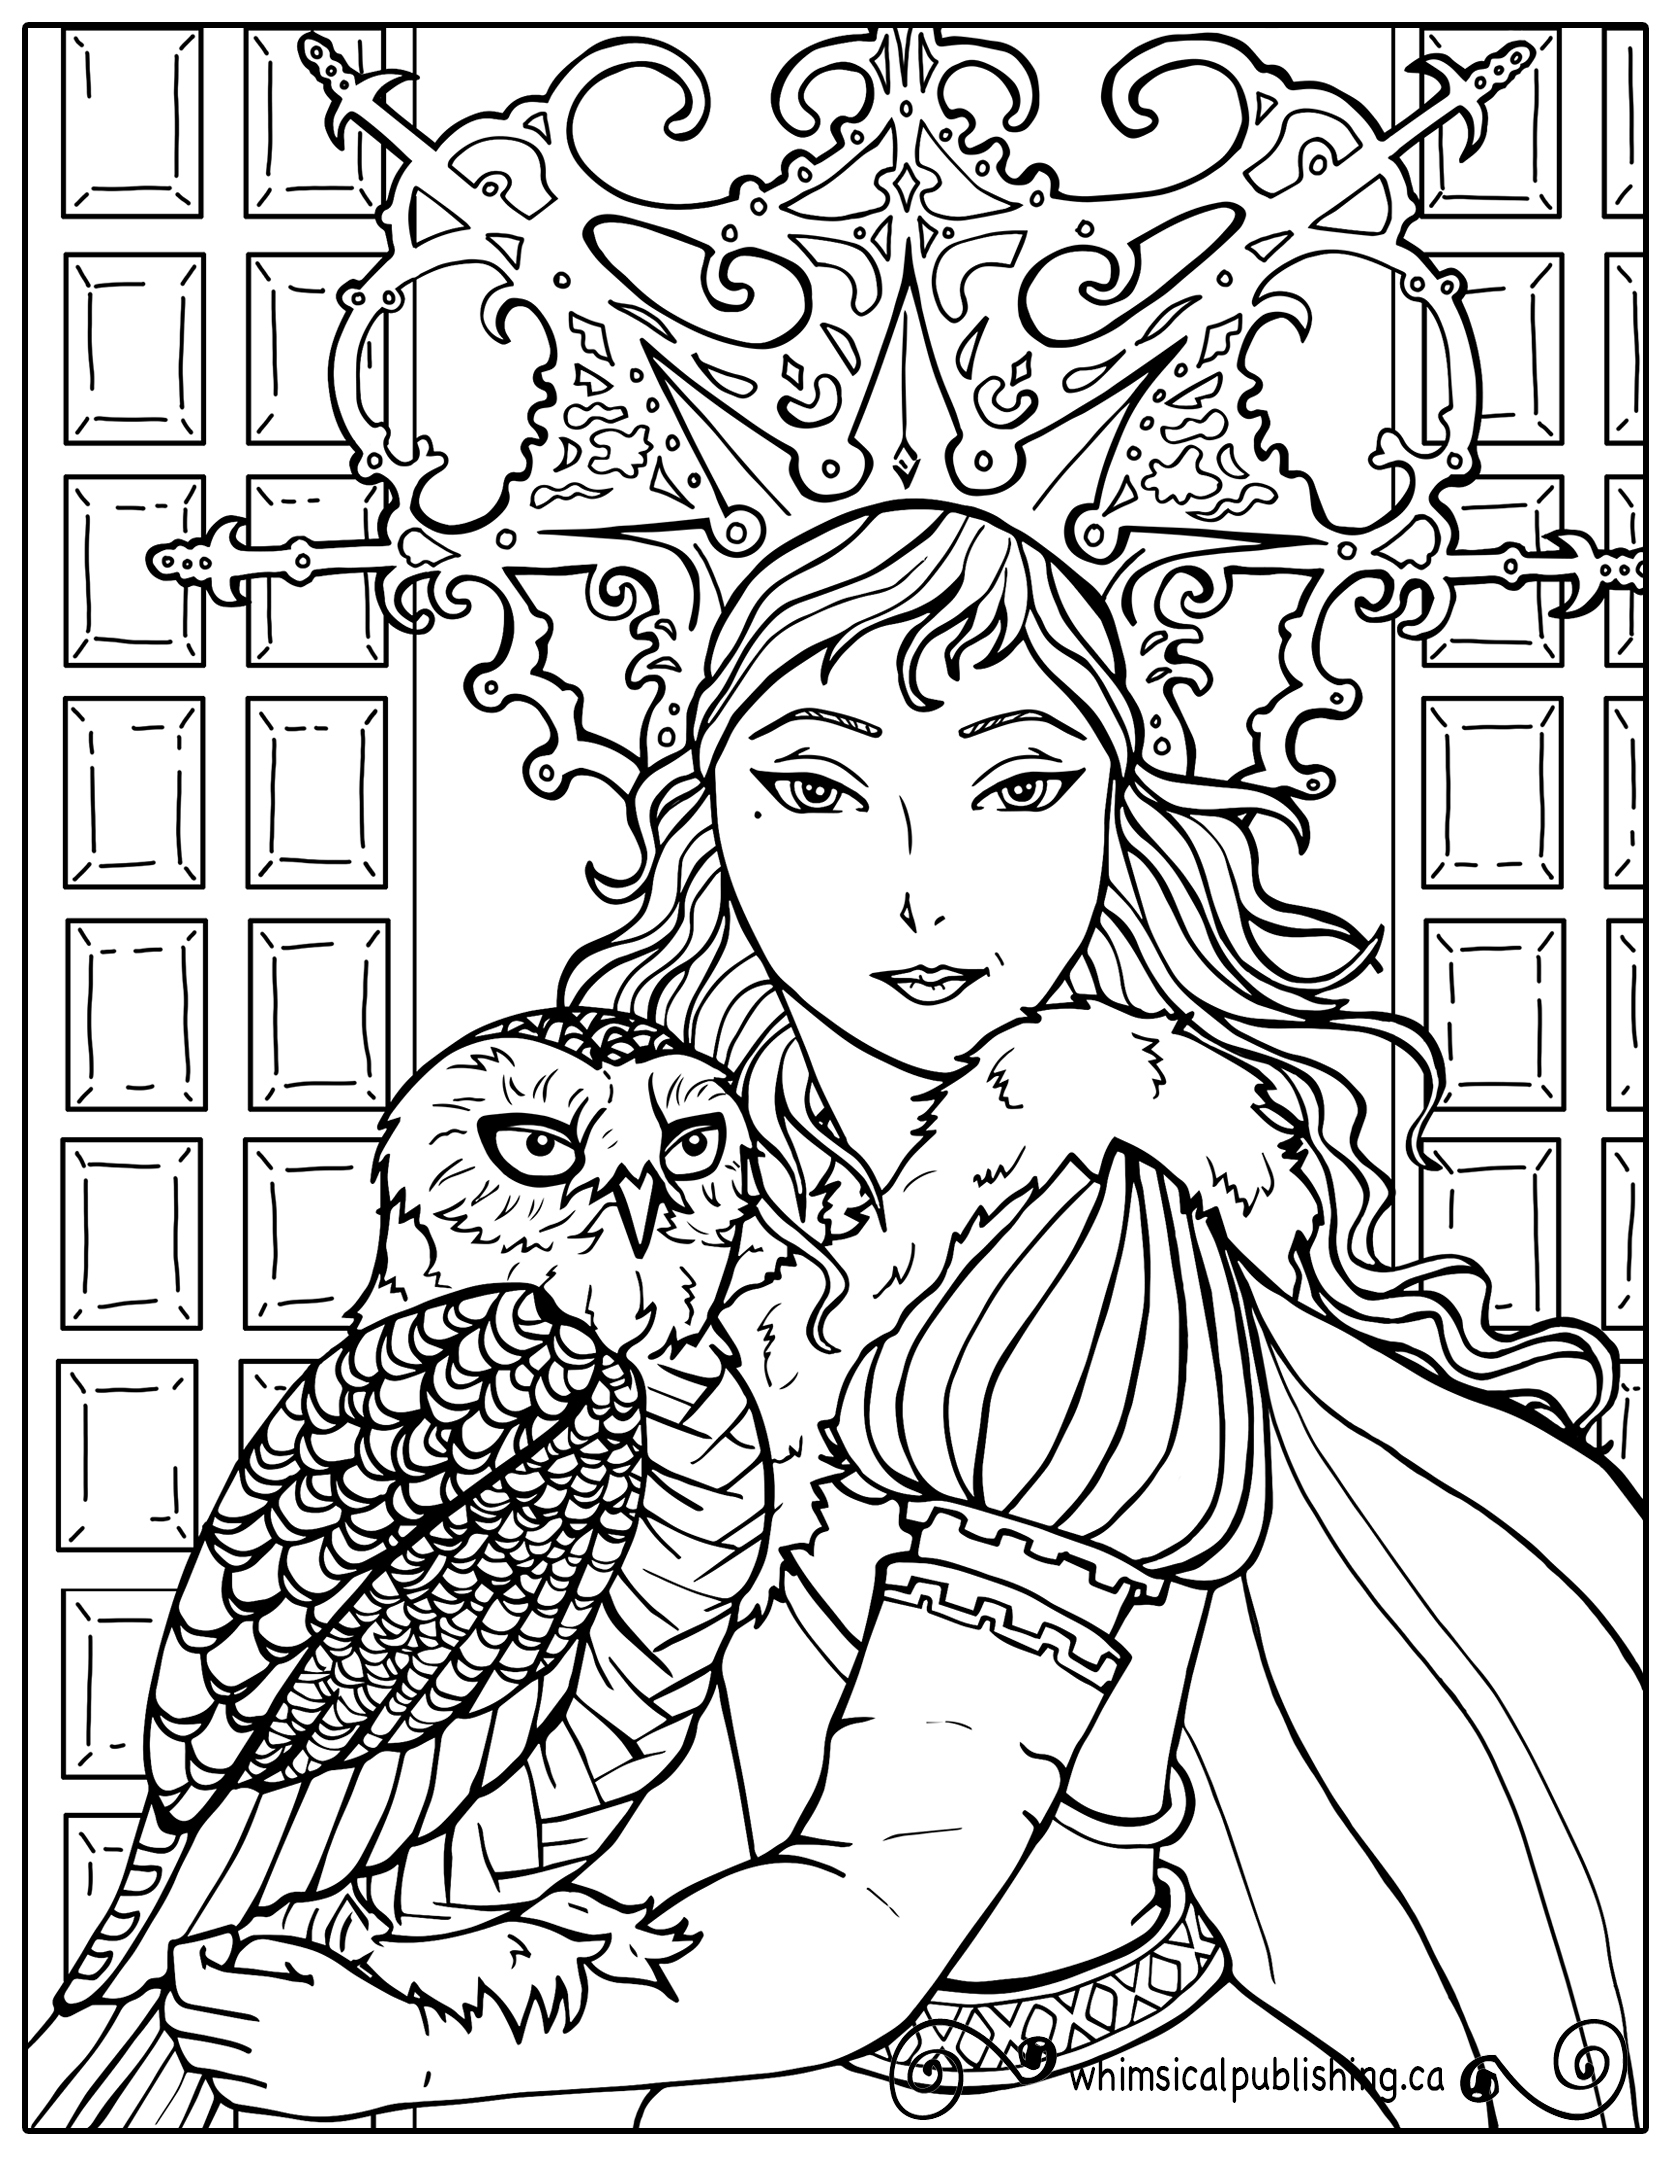 Free Fairy Coloring Pages For Adults To Print - Draw-smidgen